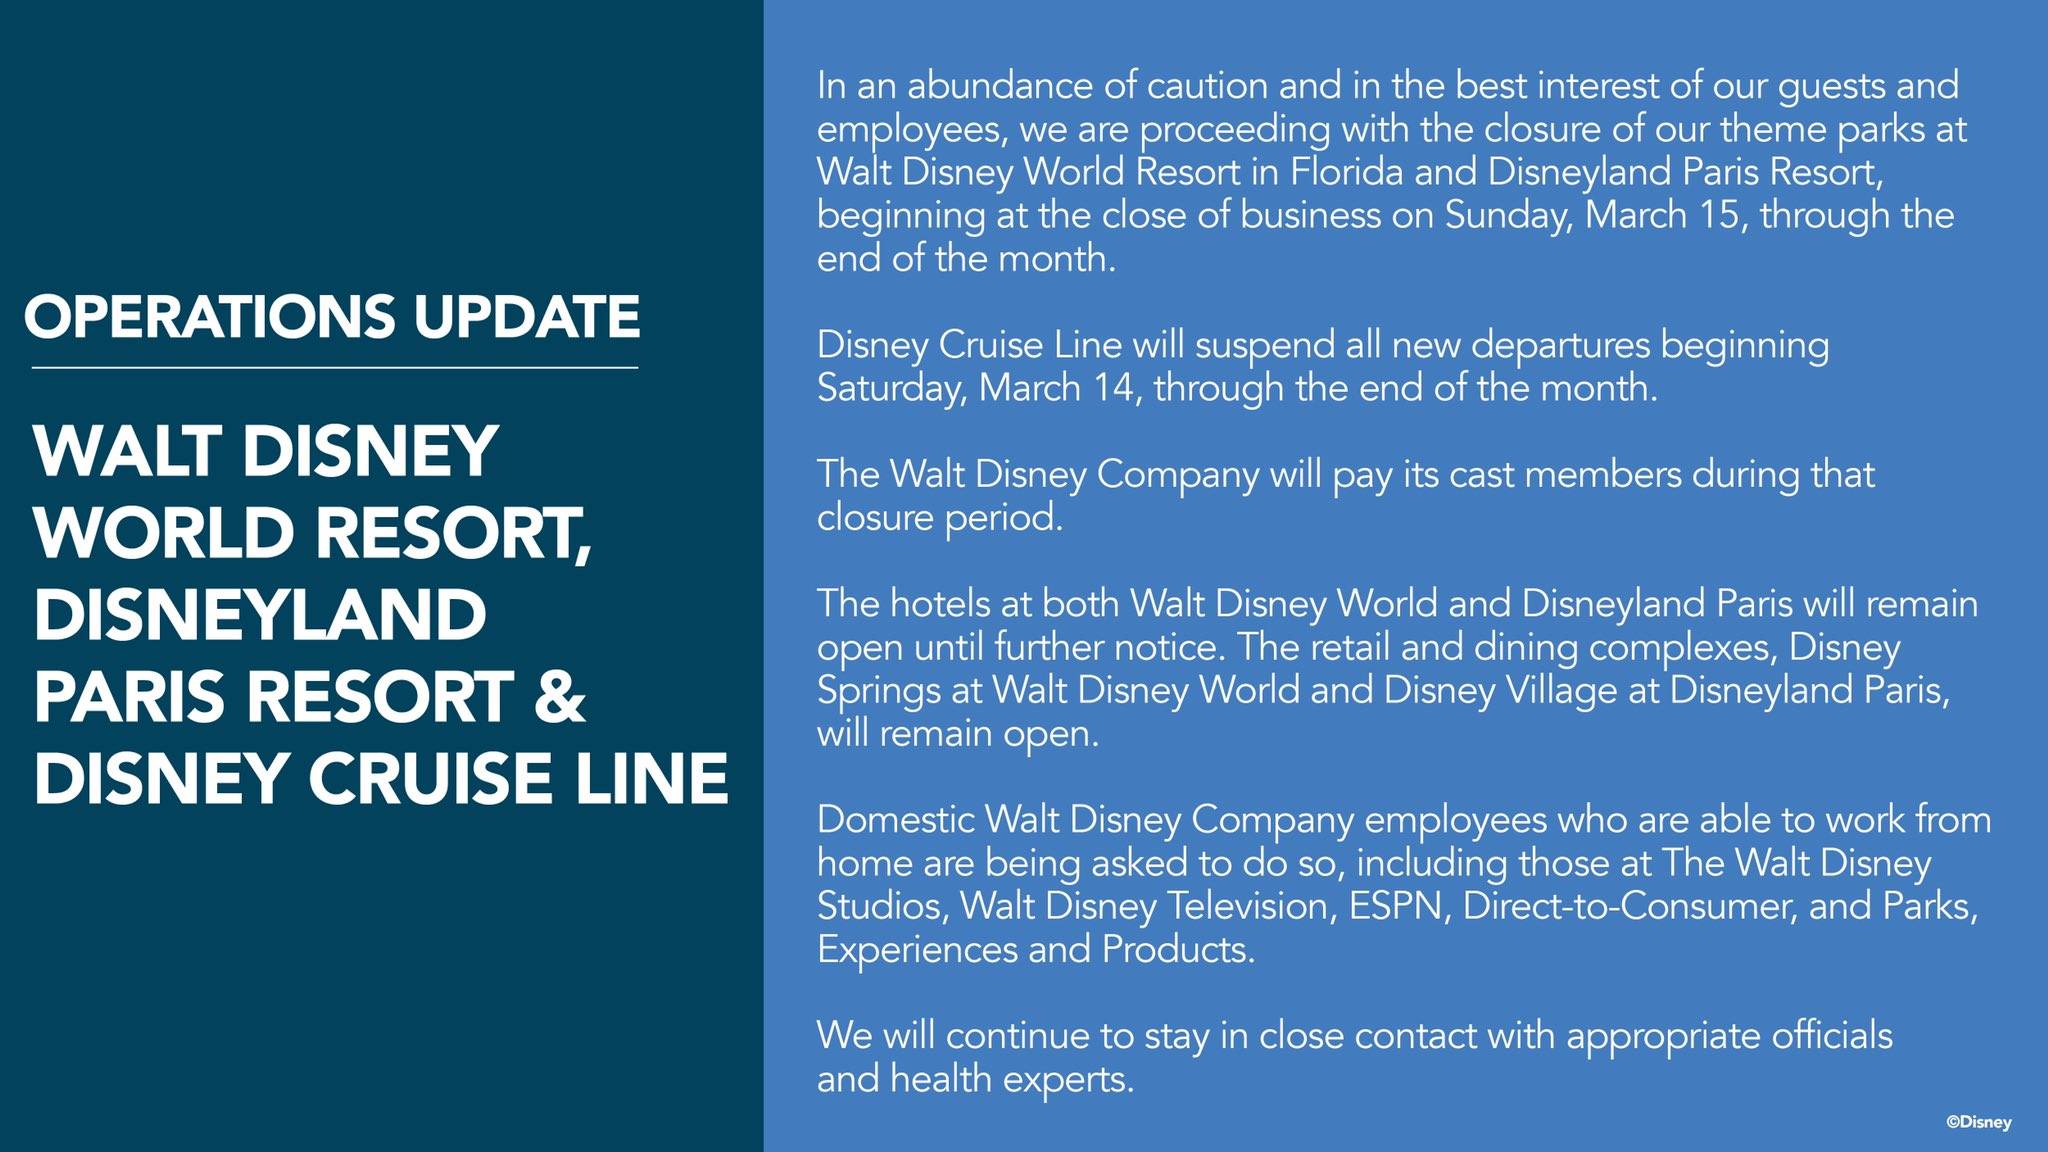 Walt Disney World to close theme parks at the end of March 15 through the end of March